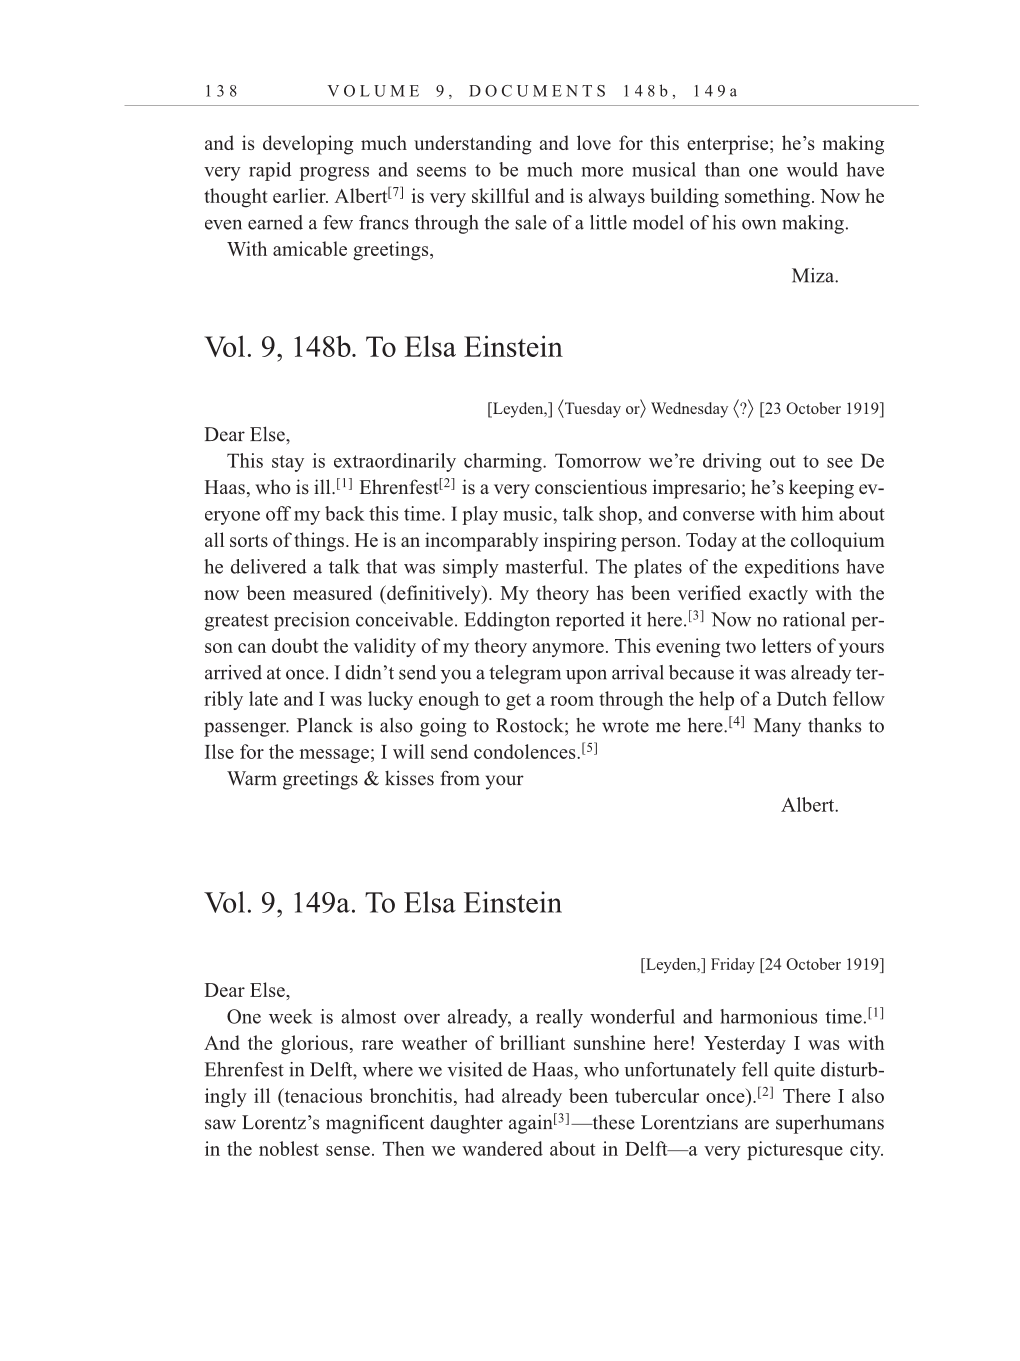 Volume 10: The Berlin Years: Correspondence, May-December 1920, and Supplementary Correspondence, 1909-1920 (English translation supplement) page 138